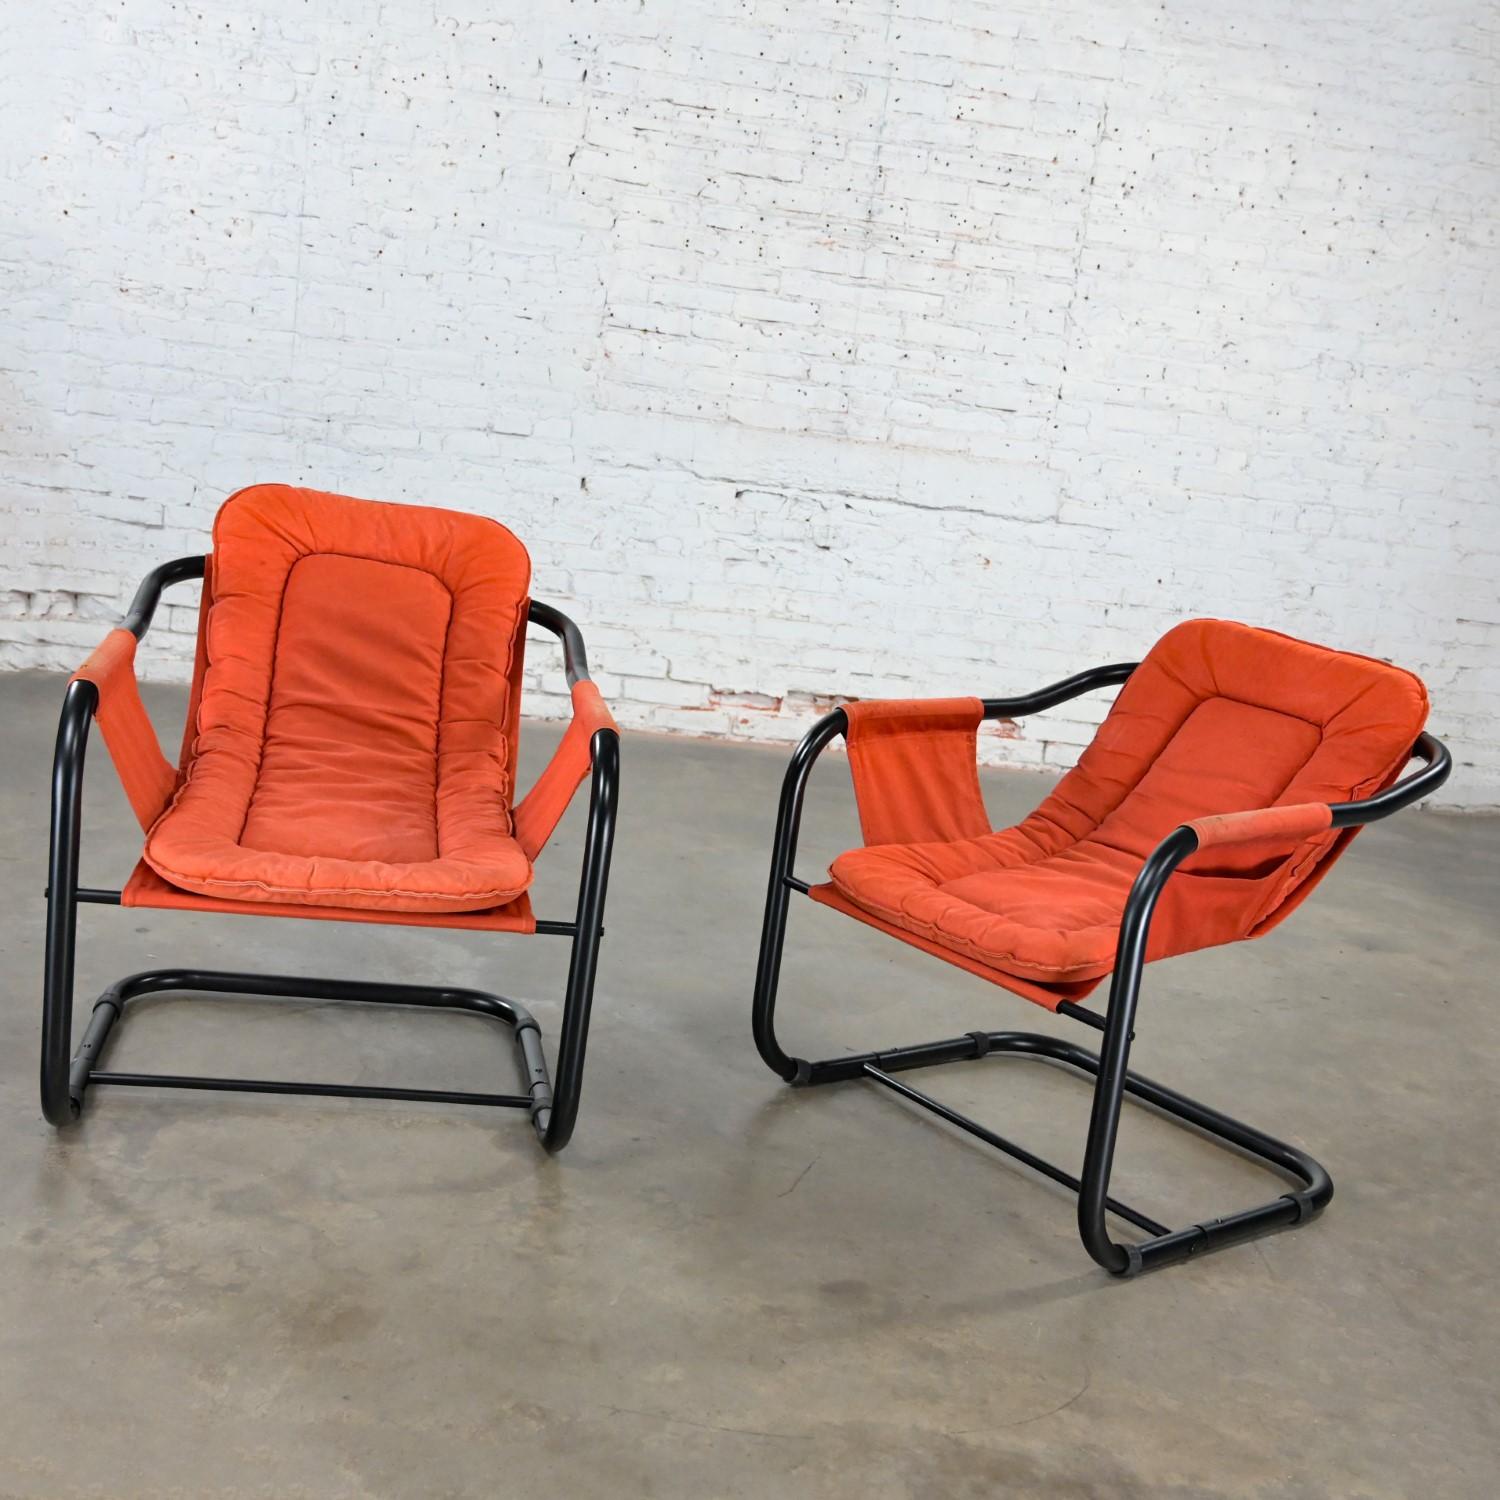 1970’s Modern Orange & Black Tube Cantilever Sling Lounge Chairs Jerry Johnson S For Sale 1